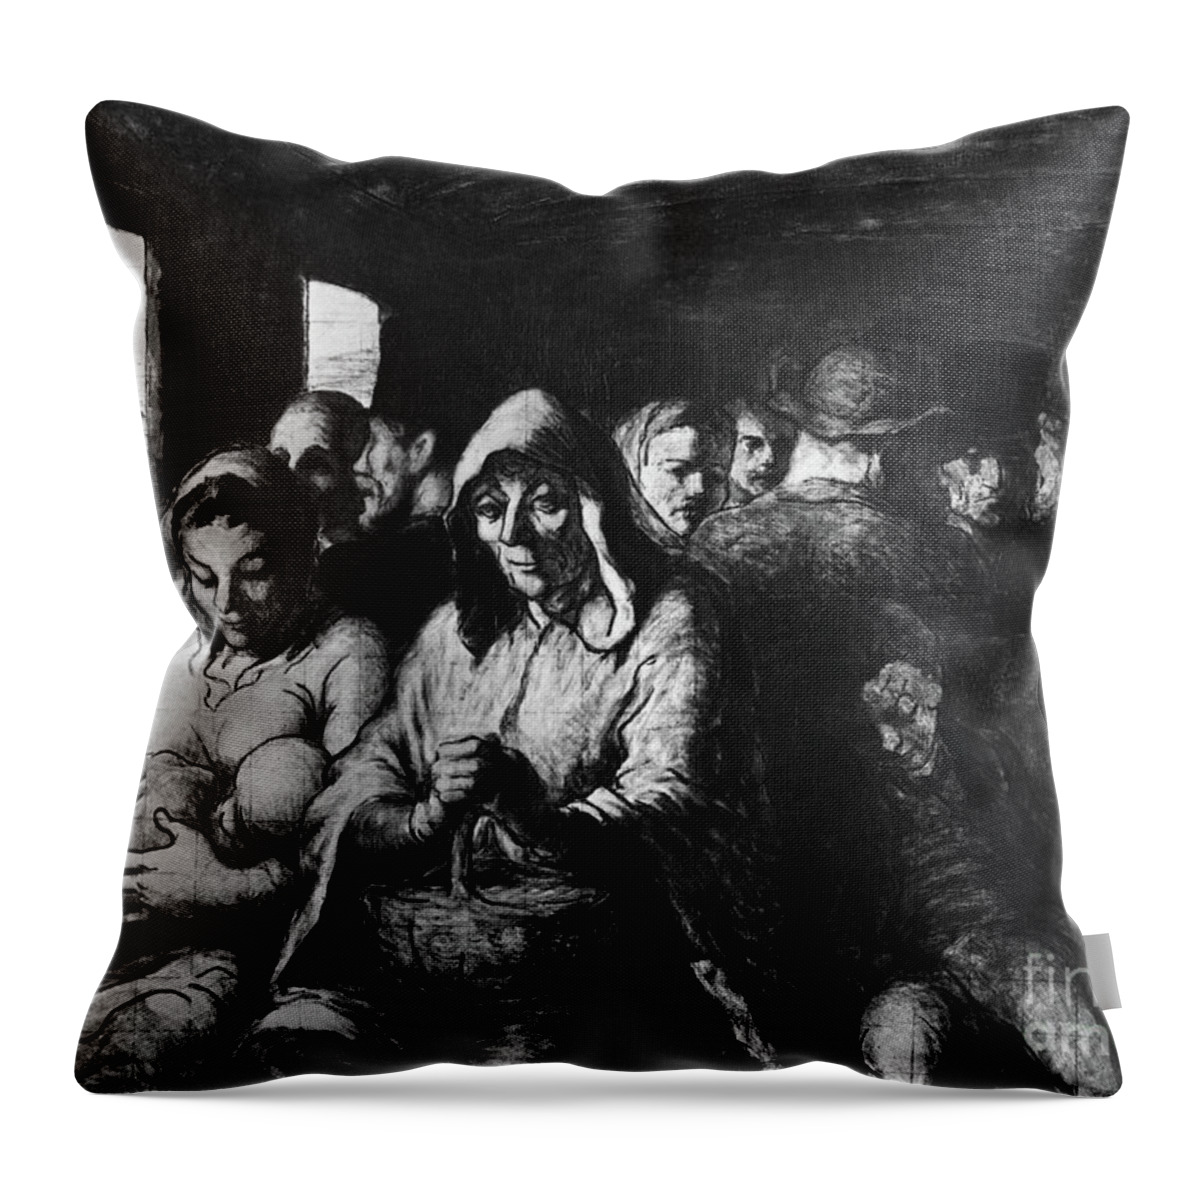 Honore Daumier Throw Pillow featuring the painting The Third Class Carriage By Honore Daumier by Honore Daumier